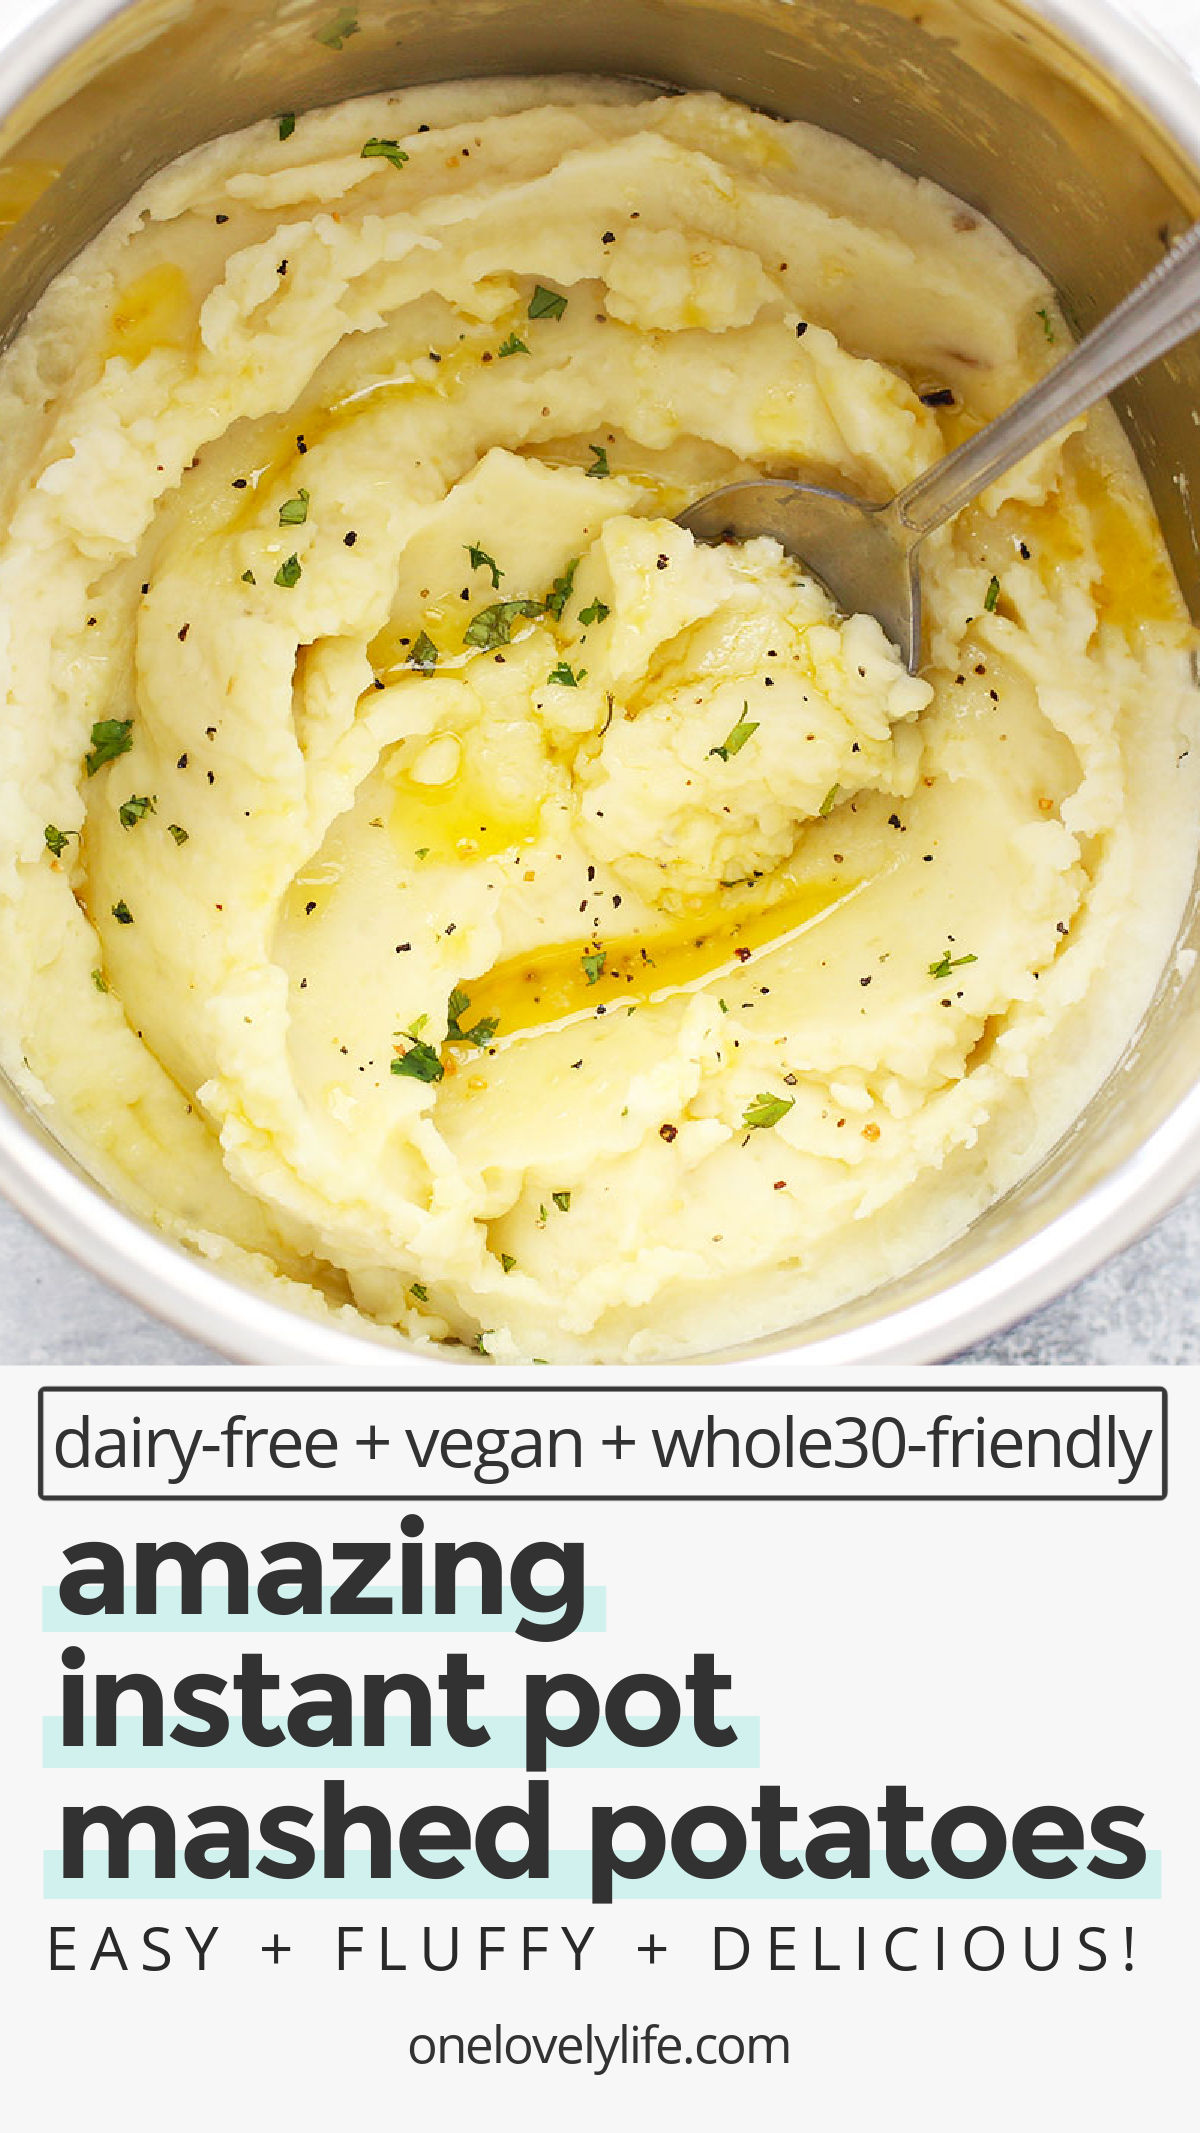 Instant Pot Mashed Potatoes - These creamy, fluffy mashed potatoes are so easy, thanks to the pressure cooker! They're the perfect accompaniment to a hearty home-cooked meal! (Gluten-free, dairy-free, vegan + Whole30 options!) / instant pot vegan mashed potatoes / instant pot dairy free mashed potatoes // instant pot whole30 mashed potatoes / Pressure cooker mashed potatoes / dairy free mashed potatoes /